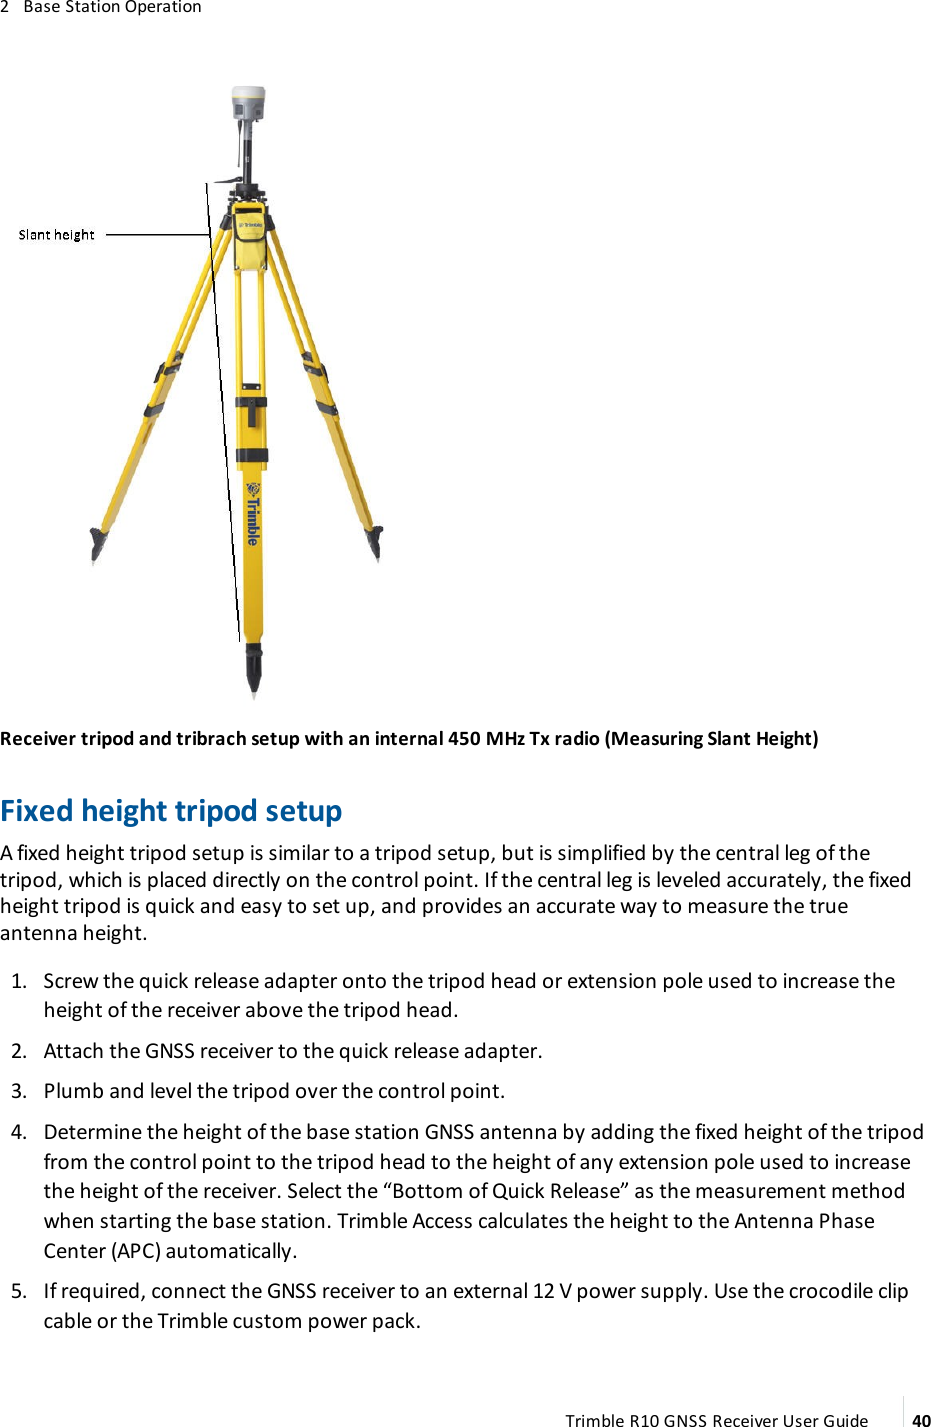 2   Base Station OperationReceiver tripod and tribrach setup with an internal 450 MHz Tx radio (Measuring Slant Height)Fixed height tripod setupA fixed height tripod setup is similar to a tripod setup, but is simplified by the central leg of the tripod, which is placed directly on the control point. If the central leg is leveled accurately, the fixed height tripod is quick and easy to set up, and provides an accurate way to measure the true antenna height. 1.  Screw the quick release adapter onto the tripod head or extension pole used to increase the height of the receiver above the tripod head. 2.  Attach the GNSS receiver to the quick release adapter. 3.  Plumb and level the tripod over the control point. 4.  Determine the height of the base station GNSS antenna by adding the fixed height of the tripod from the control point to the tripod head to the height of any extension pole used to increase the height of the receiver. Select the “Bottom of Quick Release” as the measurement method when starting the base station. Trimble Access calculates the height to the Antenna Phase Center (APC) automatically. 5.  If required, connect the GNSS receiver to an external 12 V power supply. Use the crocodile clip cable or the Trimble custom power pack.Trimble R10 GNSS Receiver User Guide 40